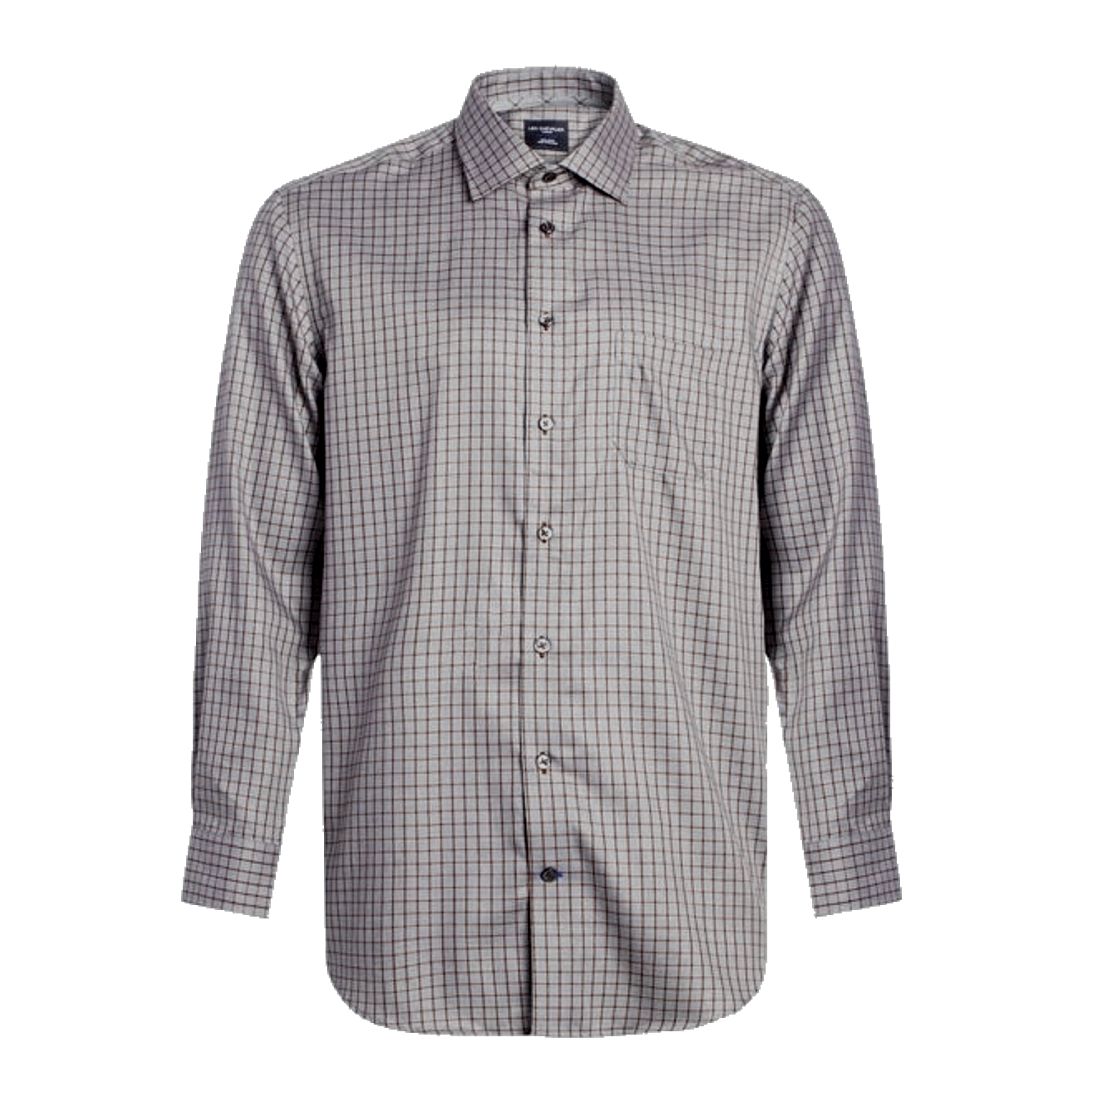 Grey and Wine Check No-Iron Cotton Dress Shirt with Spread Collar (Regular Fit) by Leo Chevalier